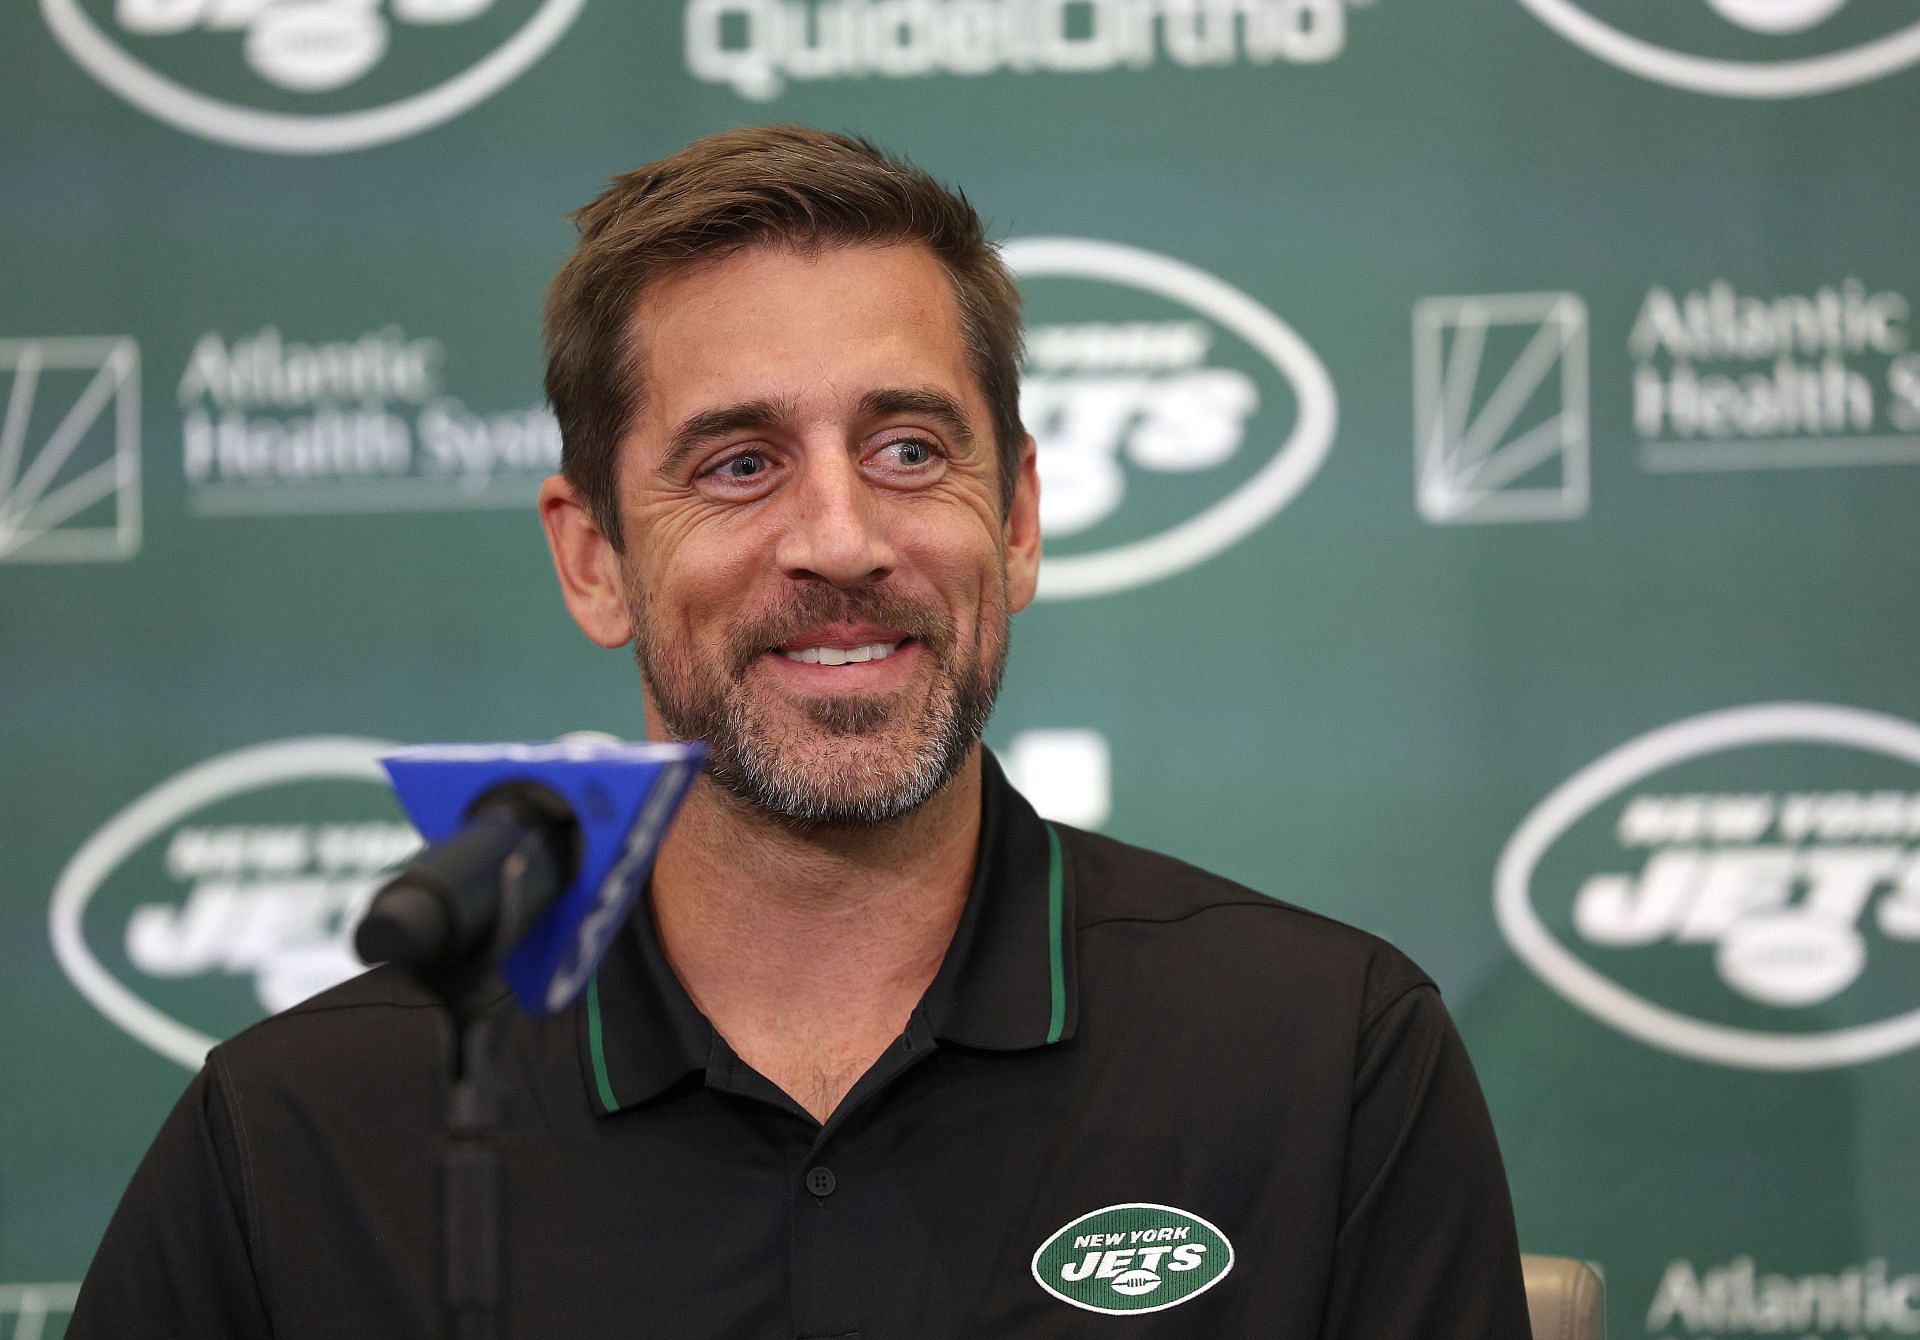 Aaron Rodgers: New York Jets Introduce Quarterback Aaron Rodgers